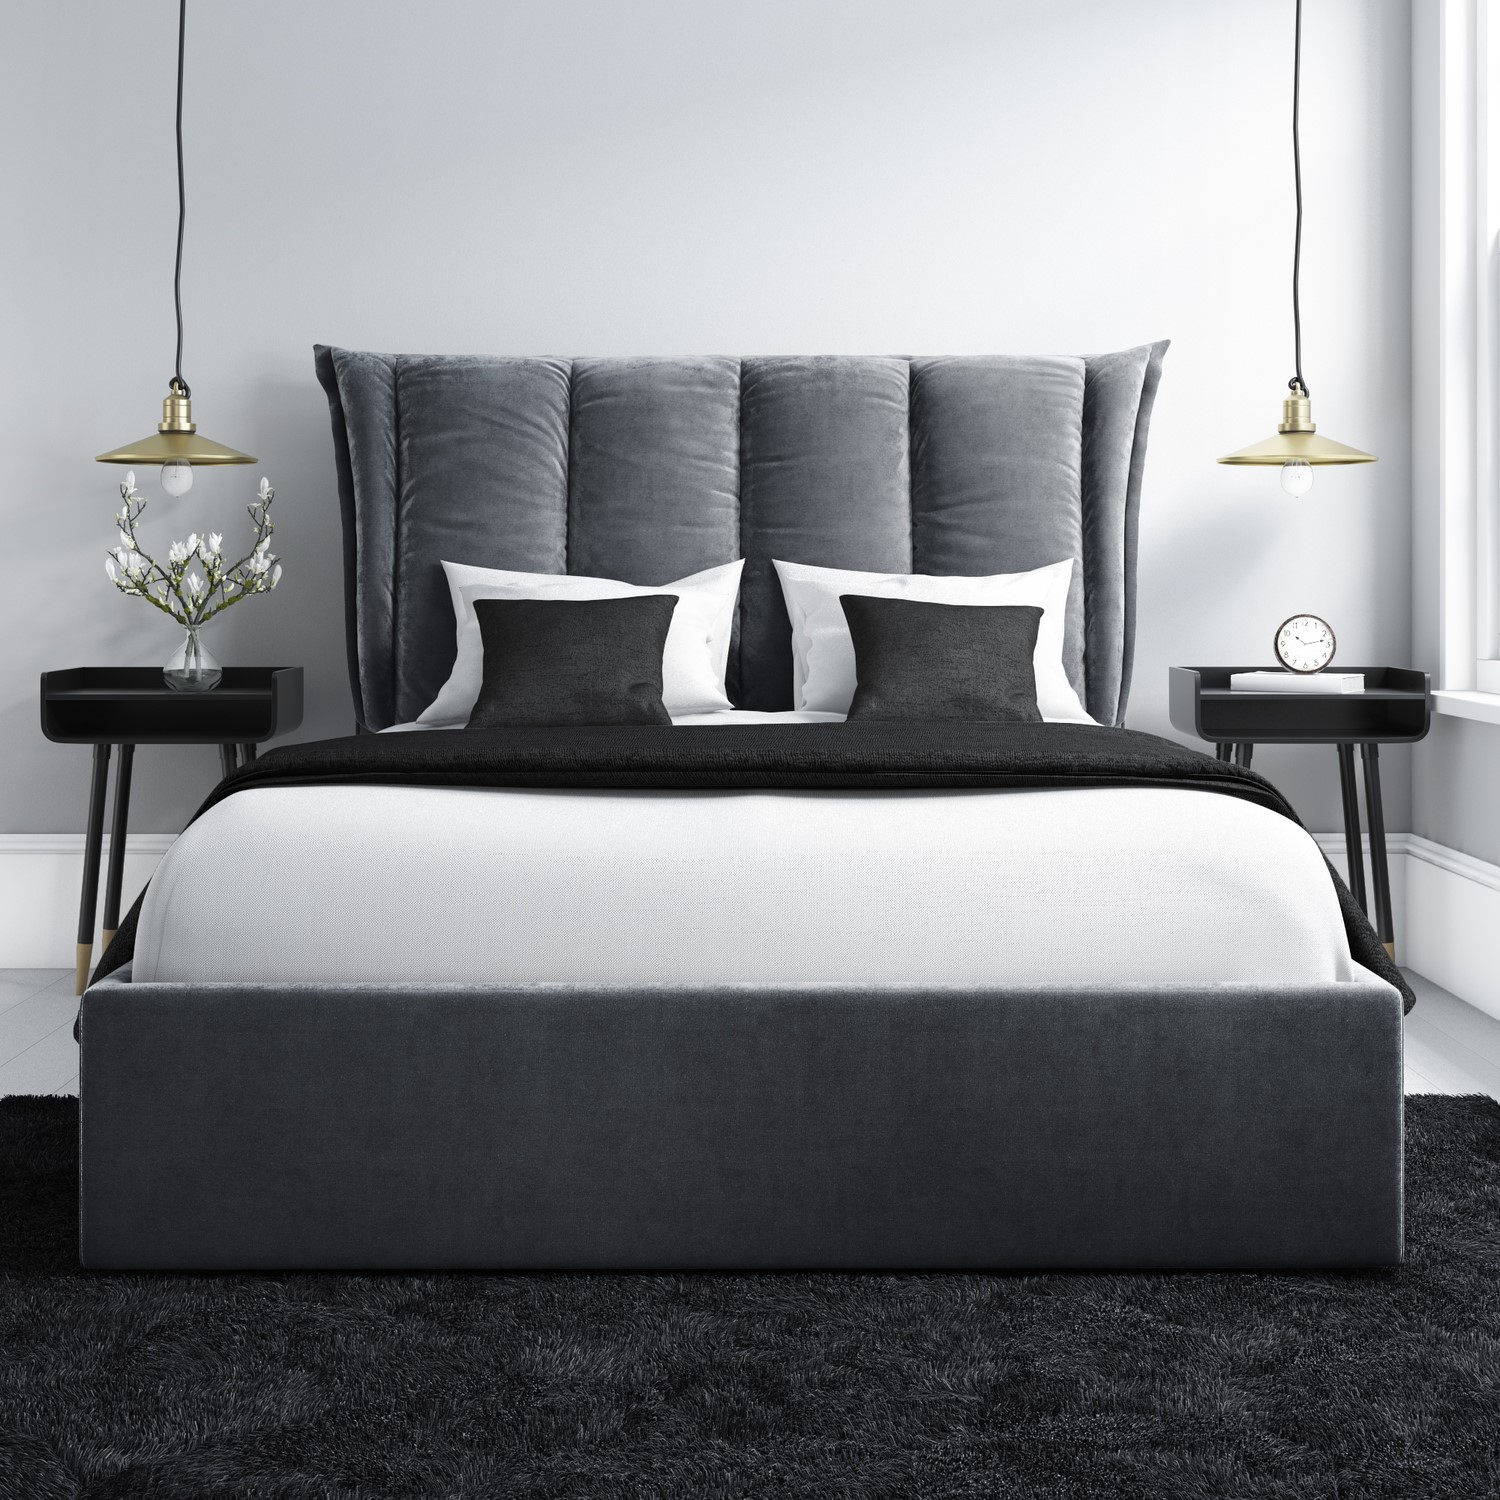 Grey Velvet King Size Ottoman Bed With, How To Make A Padded Headboard For King Size Bed